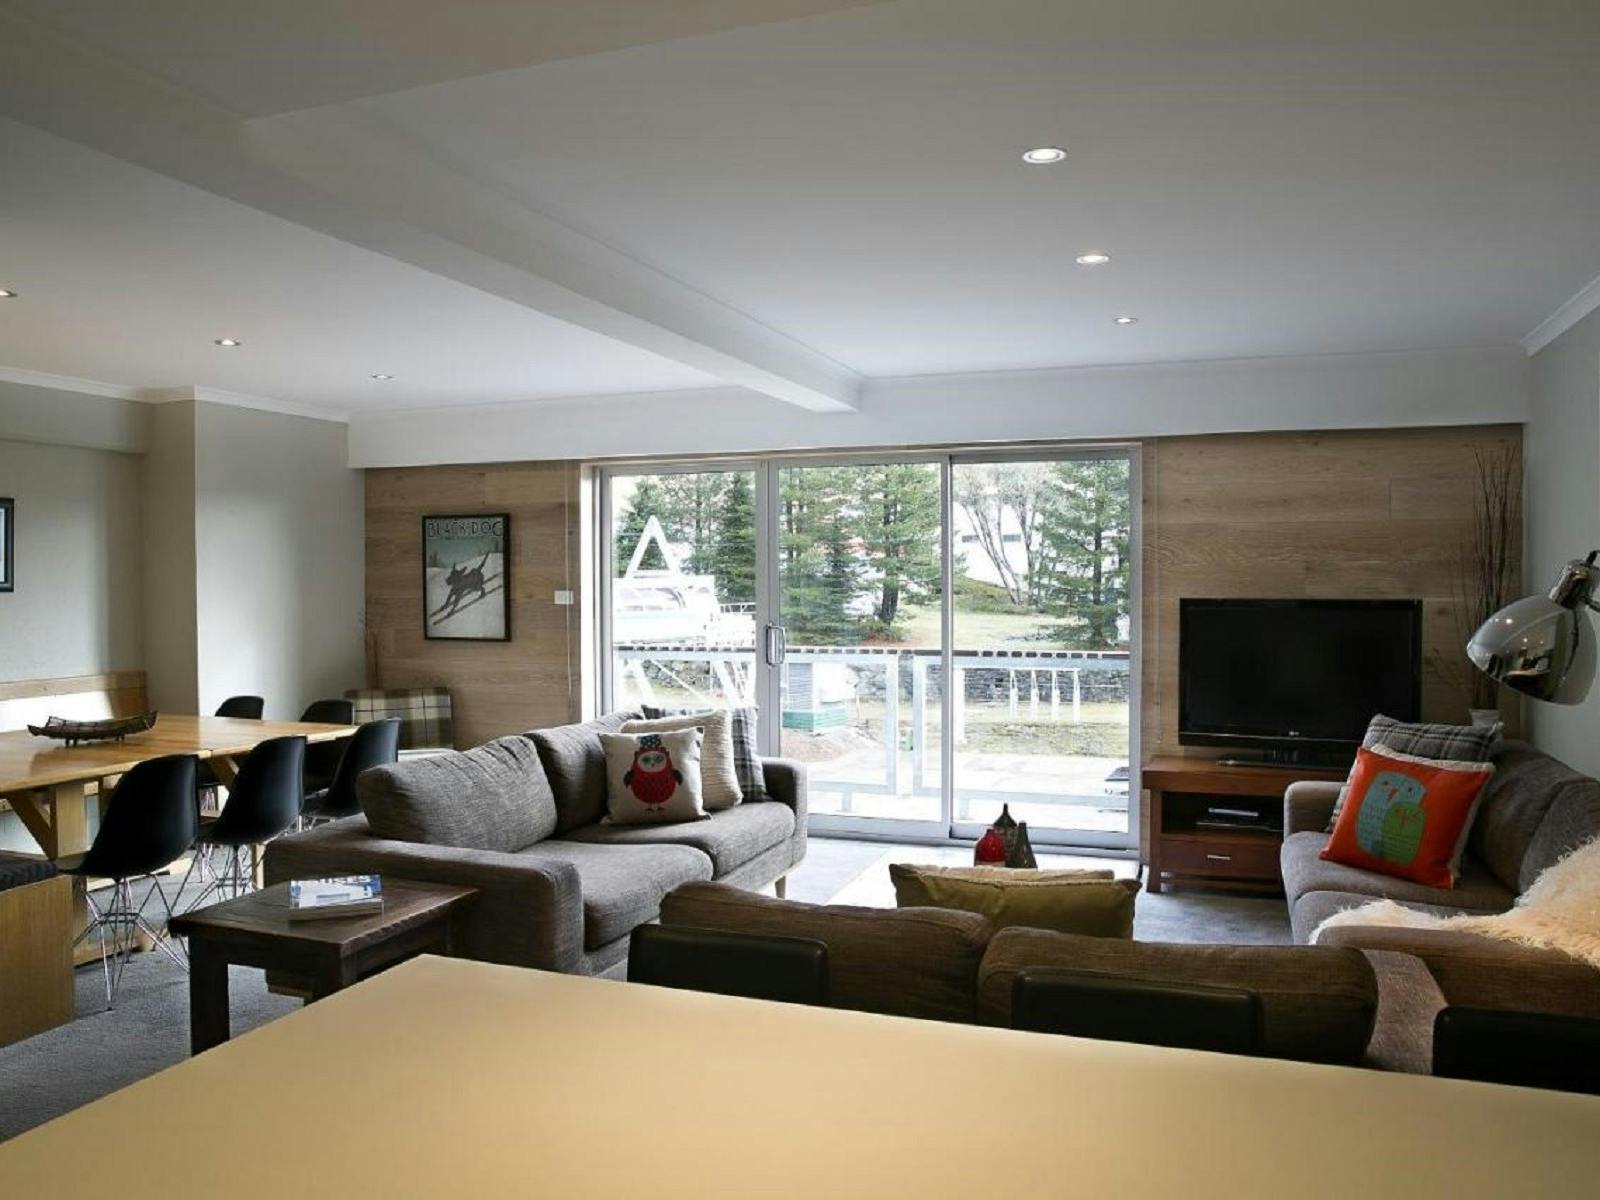 shared living area with a television